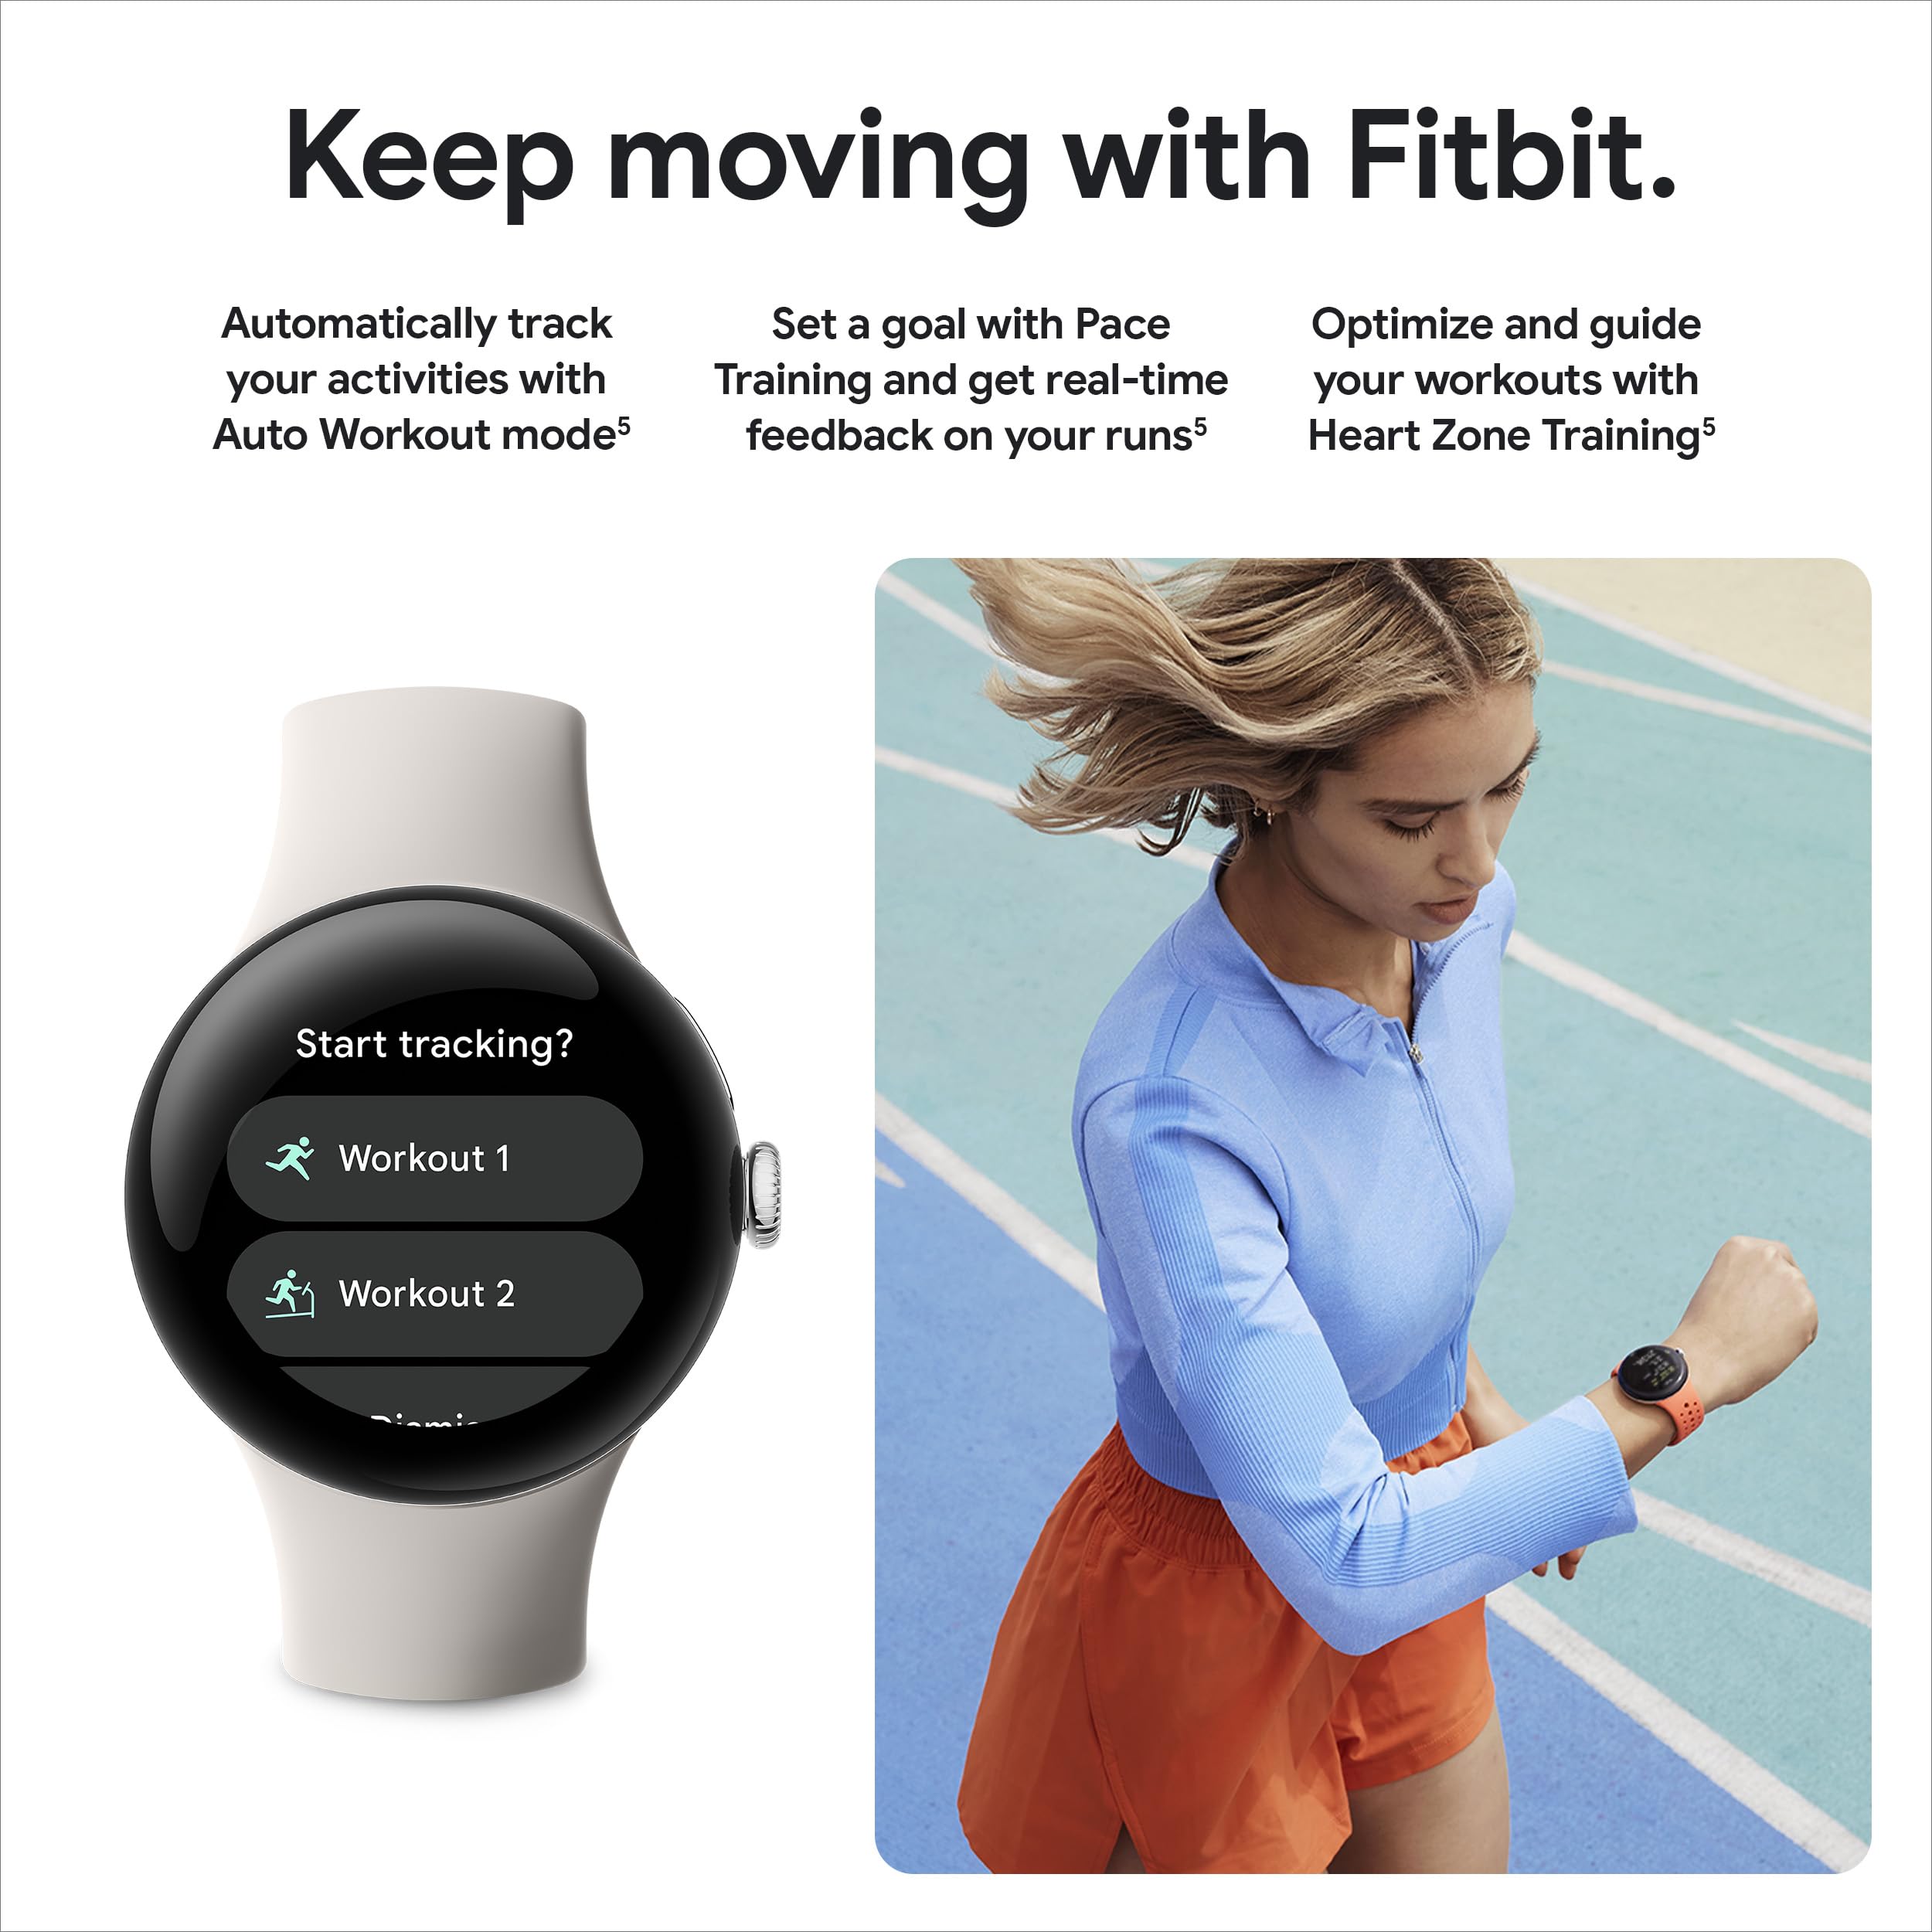 Google Pixel Watch 2 with the Best of Fitbit and Google - Heart Rate Tracking, Stress Management, Safety Features - Android Smartwatch - Matte Black Aluminum Case - Obsidian Active Band - Wi-Fi